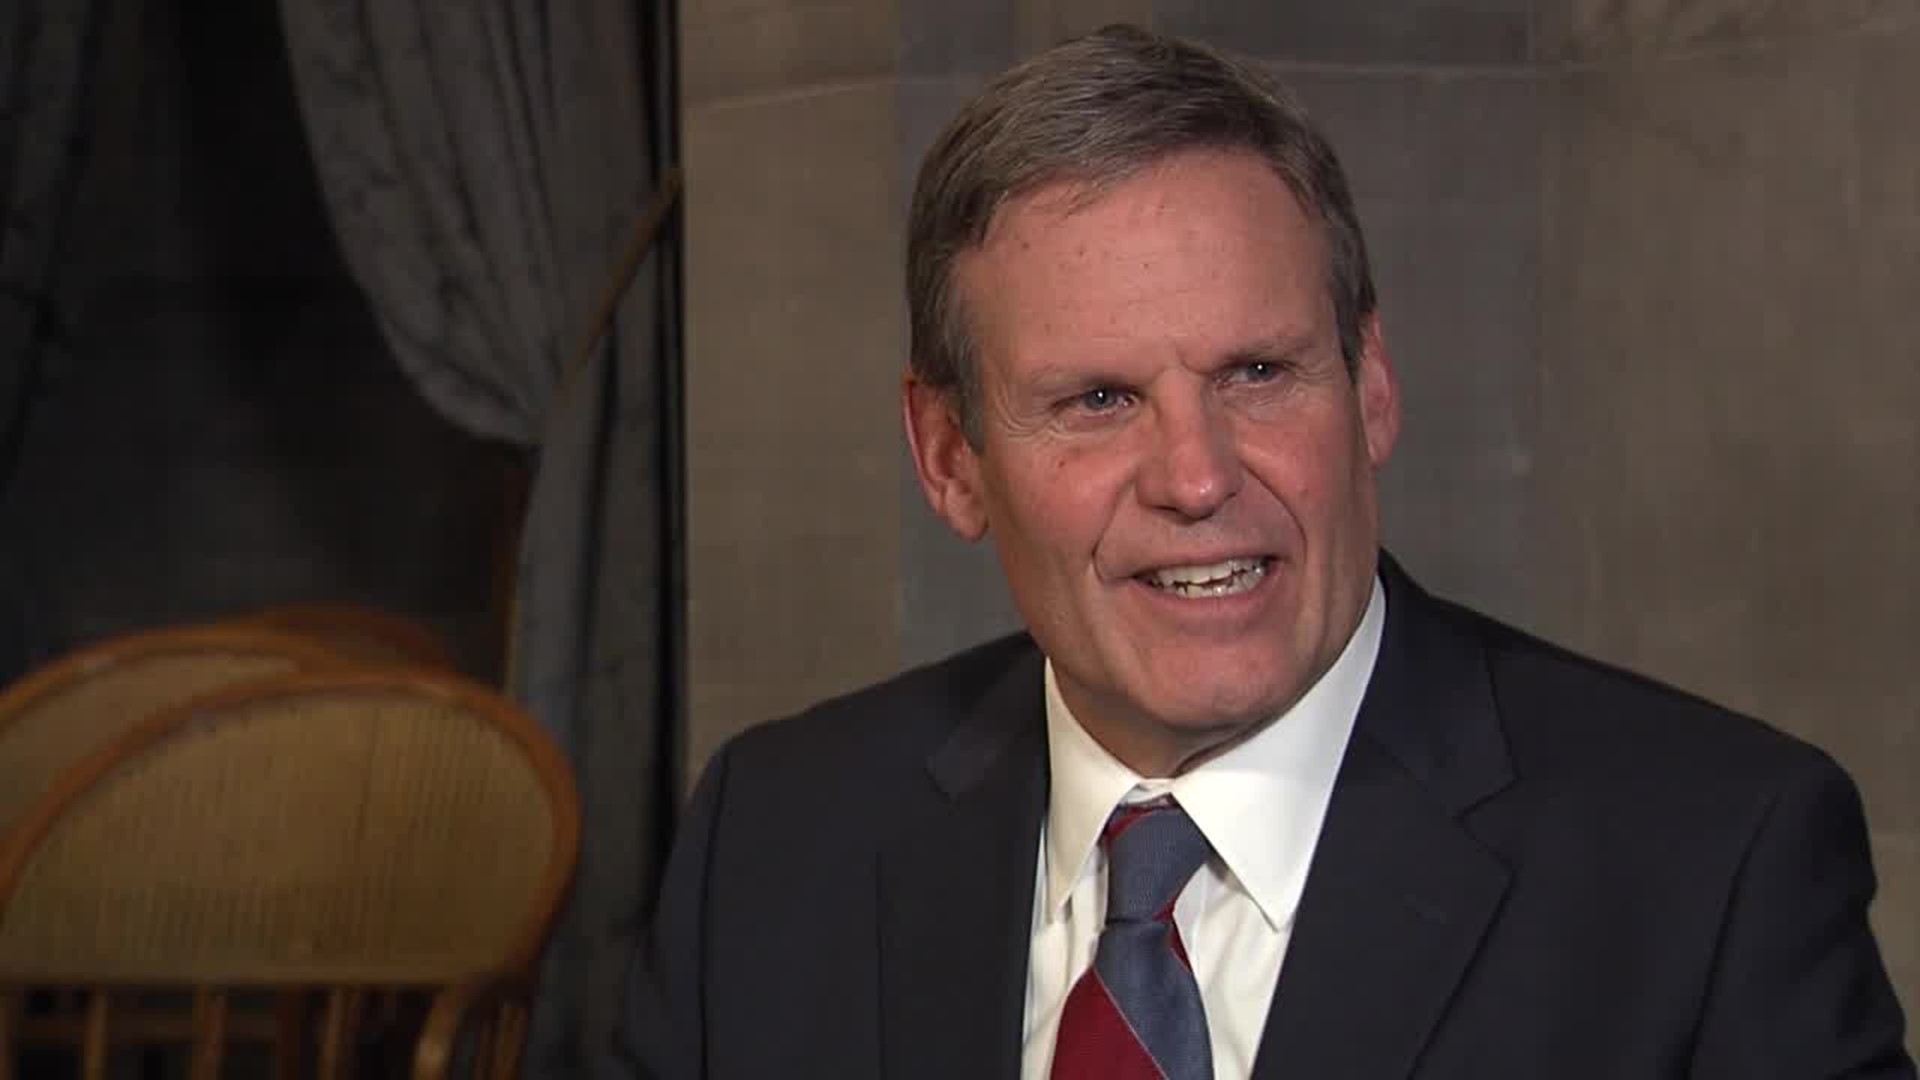 Local 24 News Anchor Richard Ransom's full exclusive interview with TN Gov. Bill Lee